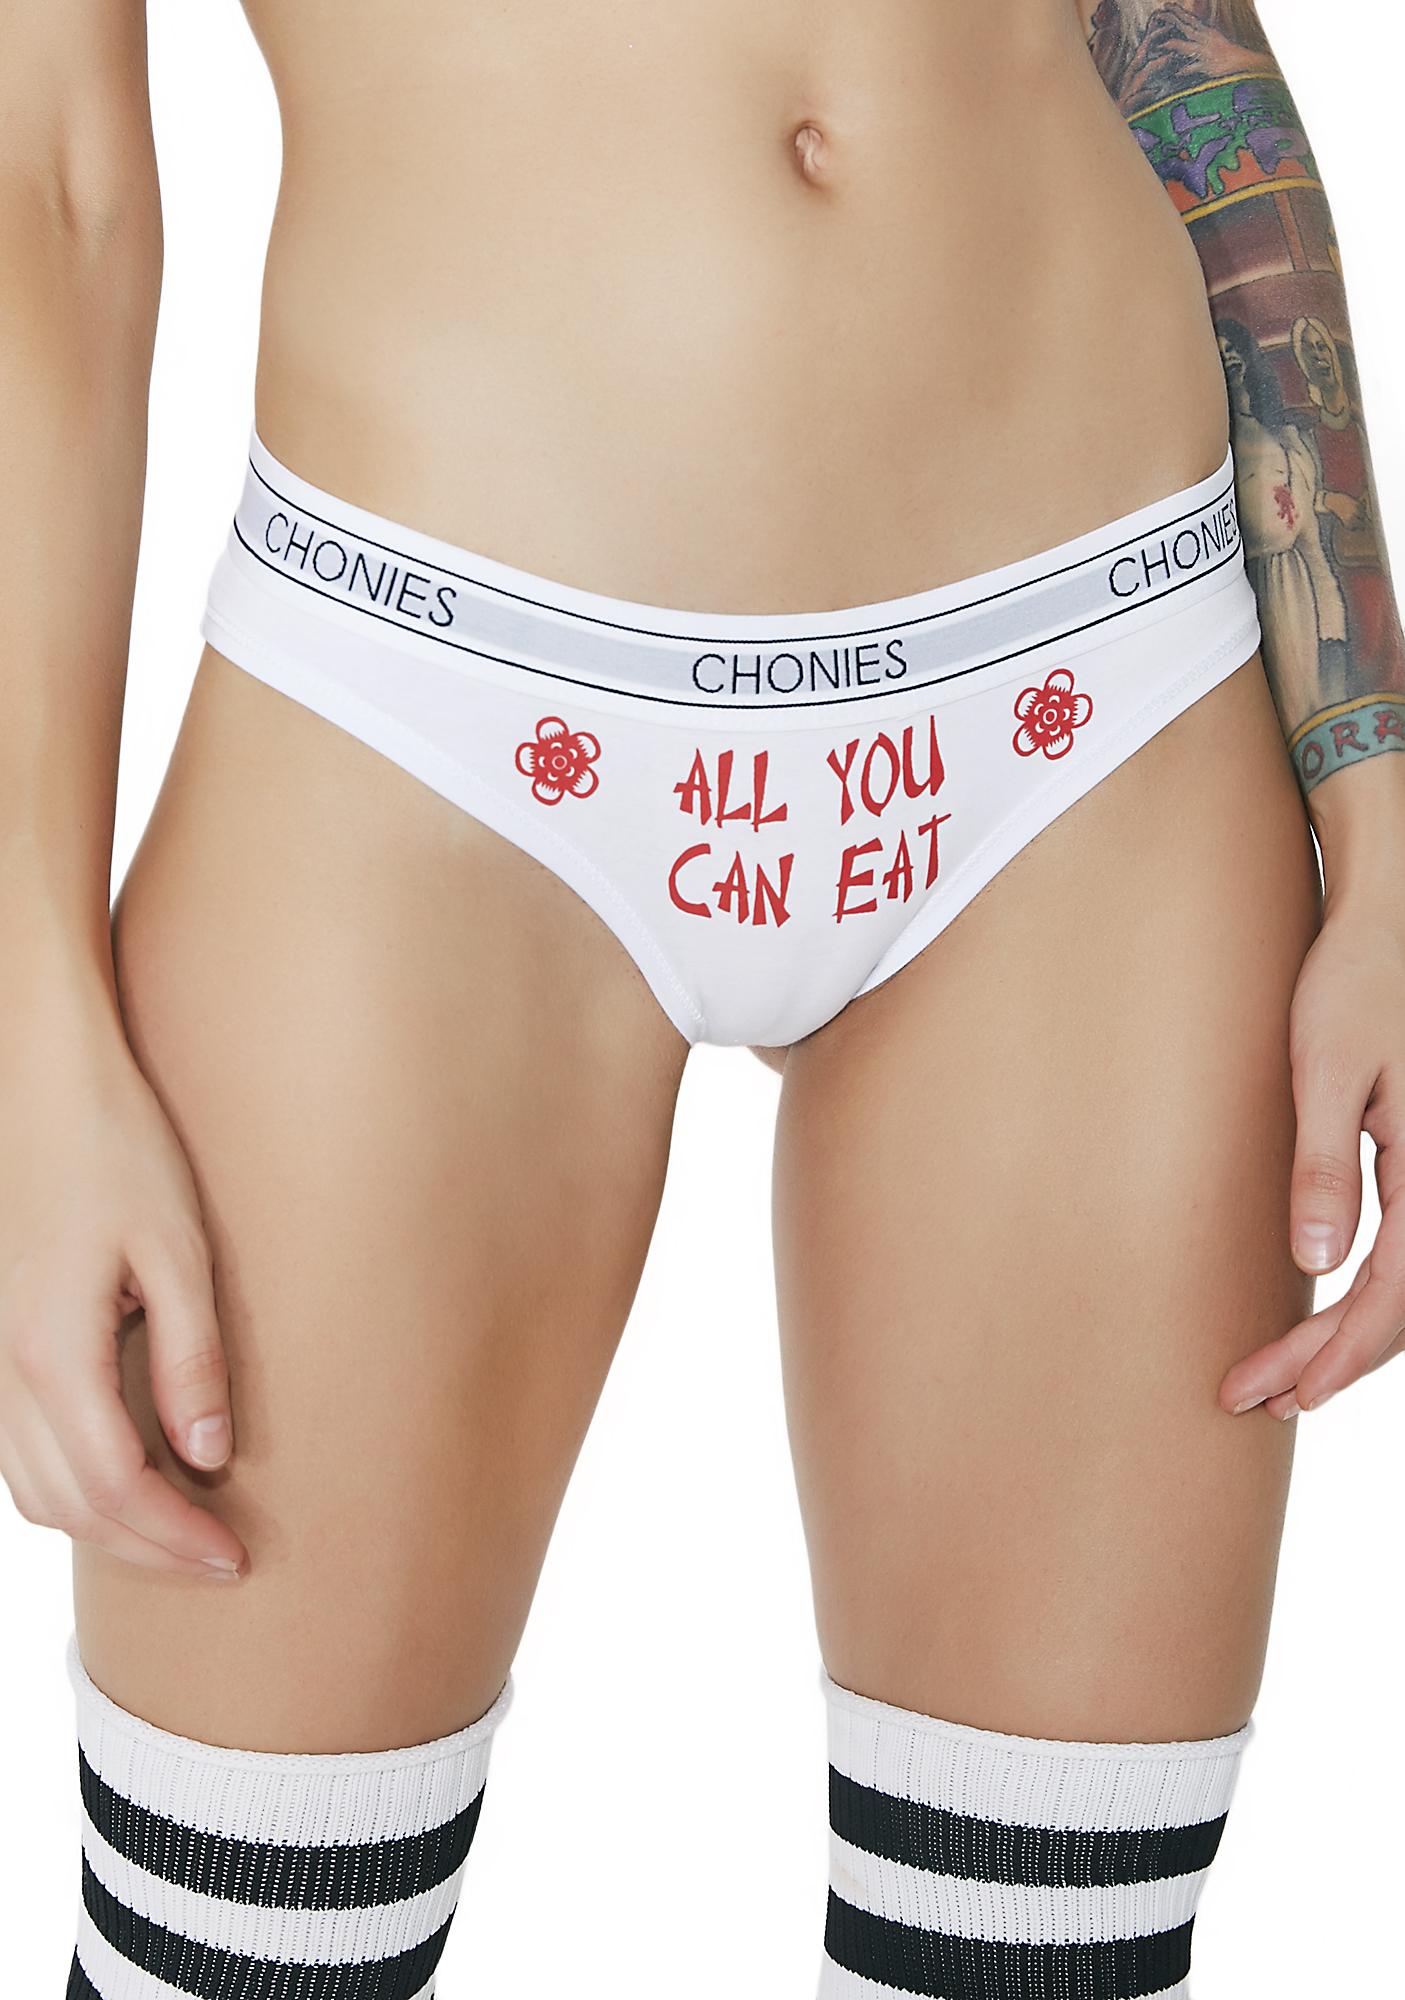 All You Can Eat Panties - All You Can Eat Classic Briefs